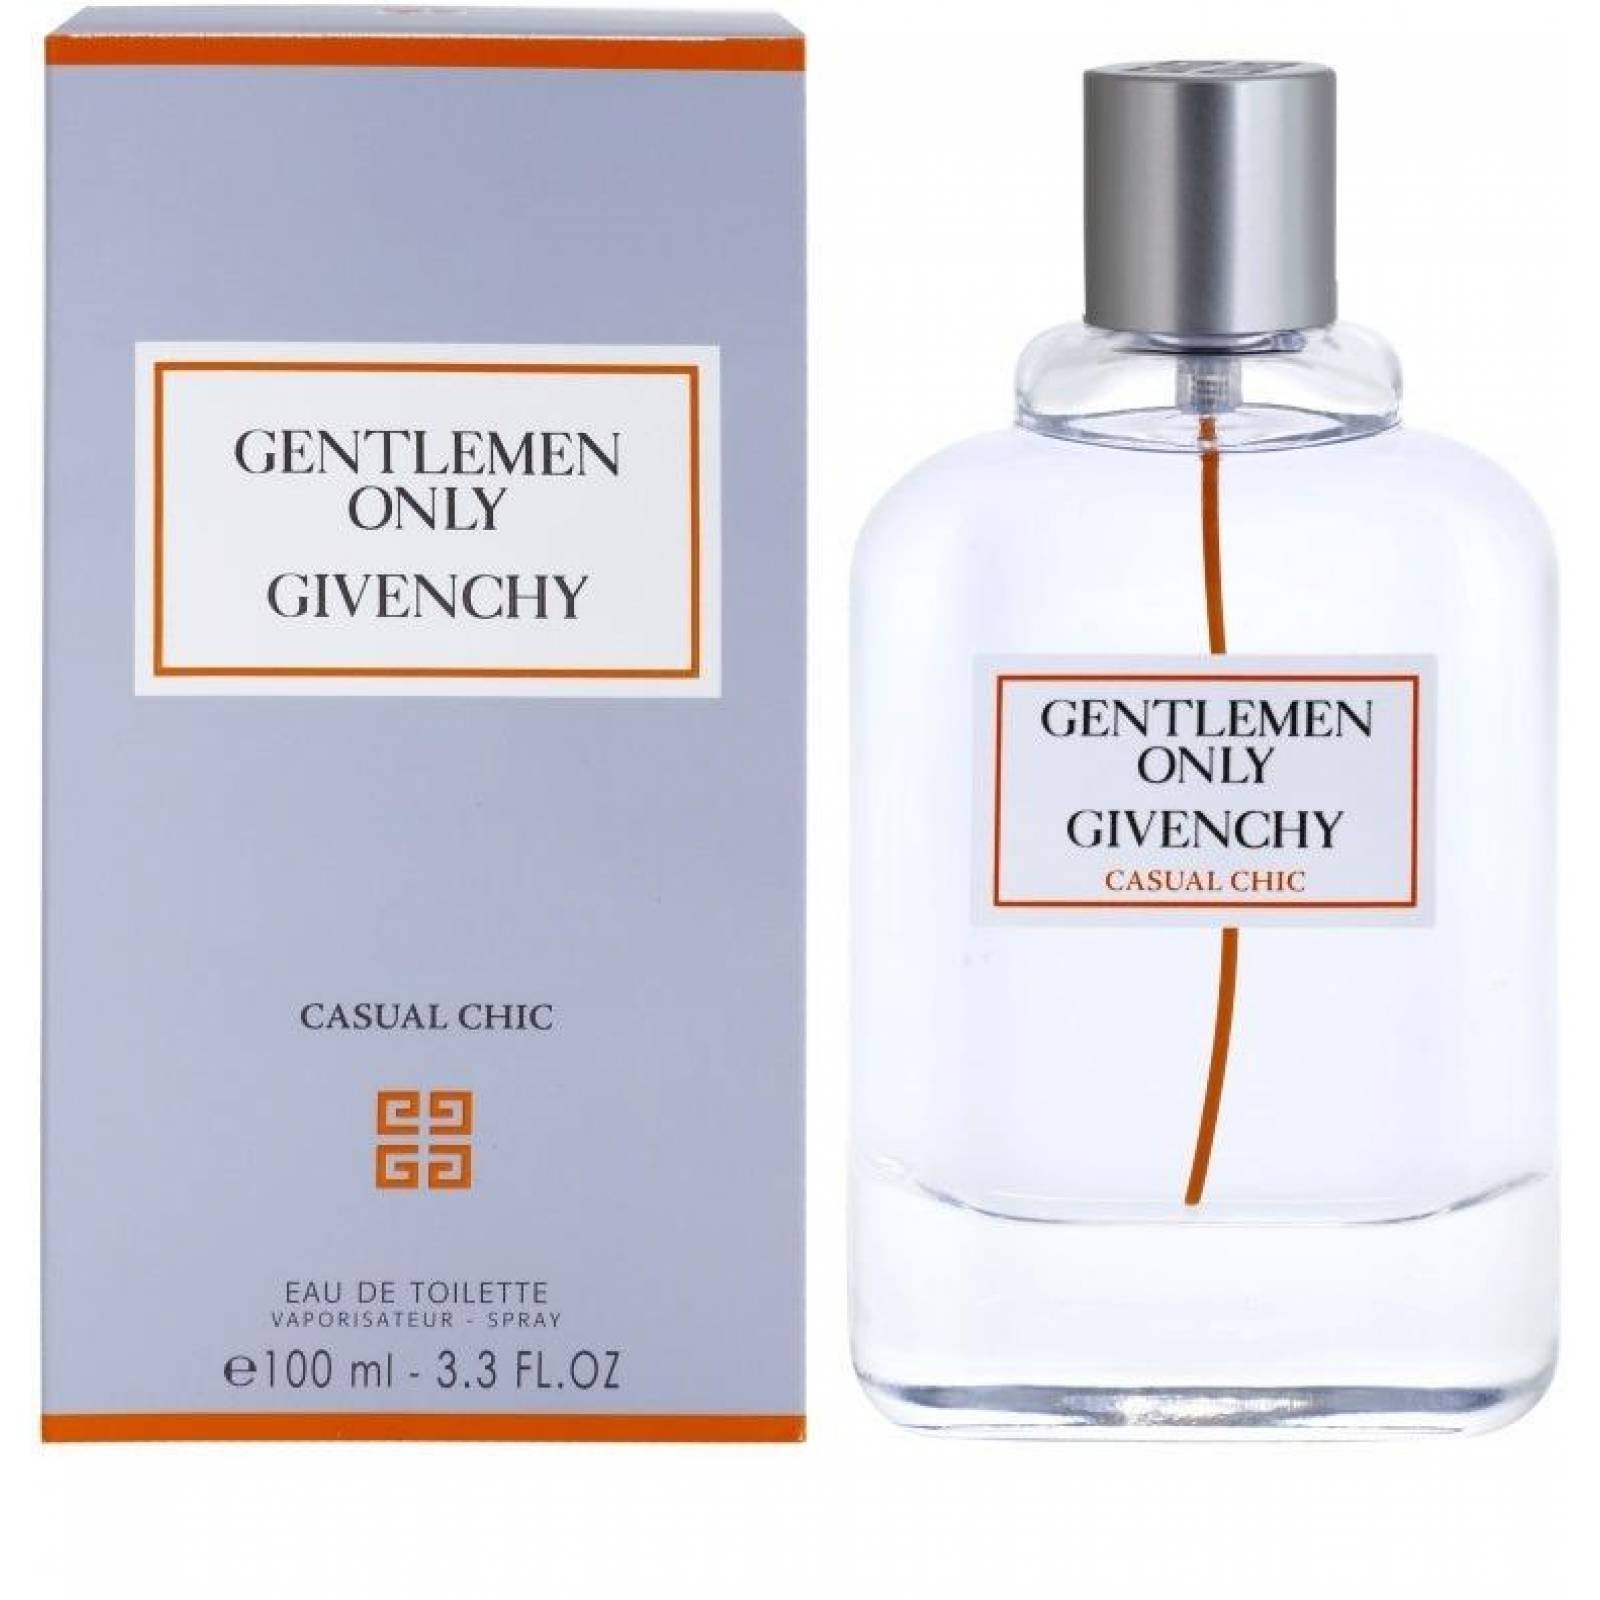 gentleman casual chic givenchy